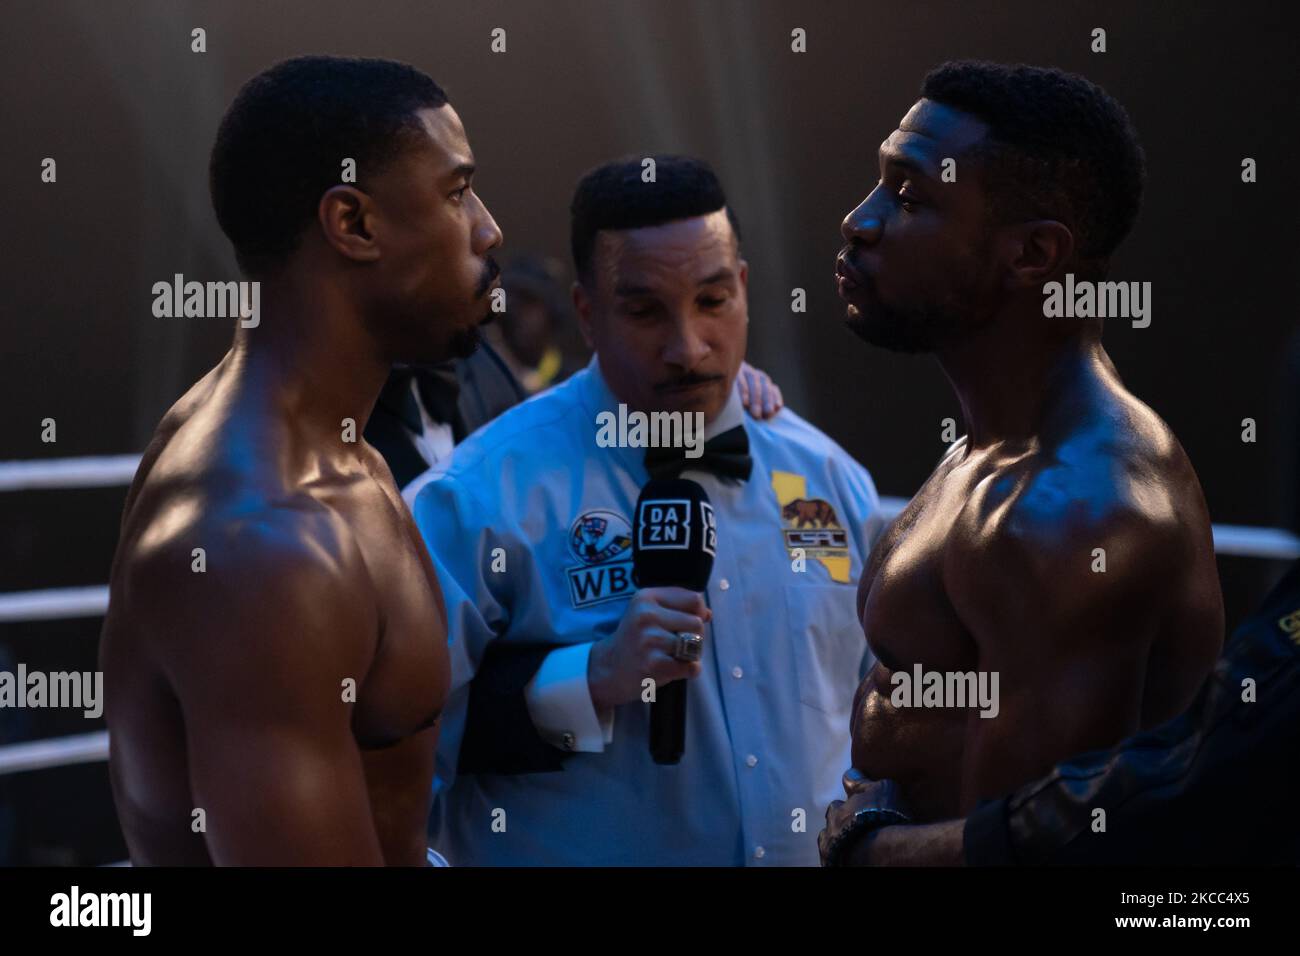 RELEASE DATE: March 3, 2023. TITLE: Creed lll. STUDIO: MGM. DIRECTOR: Michael B. Jordan. PLOT: Adonis has been thriving in both his career and family life, but when a childhood friend and former boxing prodigy resurfaces, the face-off is more than just a fight. STARRING: MICHAEL B. JORDAN as Adonis Creed, JONATHAN MAJORS as Damian Anderson . (Credit Image: © MGM/Entertainment Pictures) Stock Photo